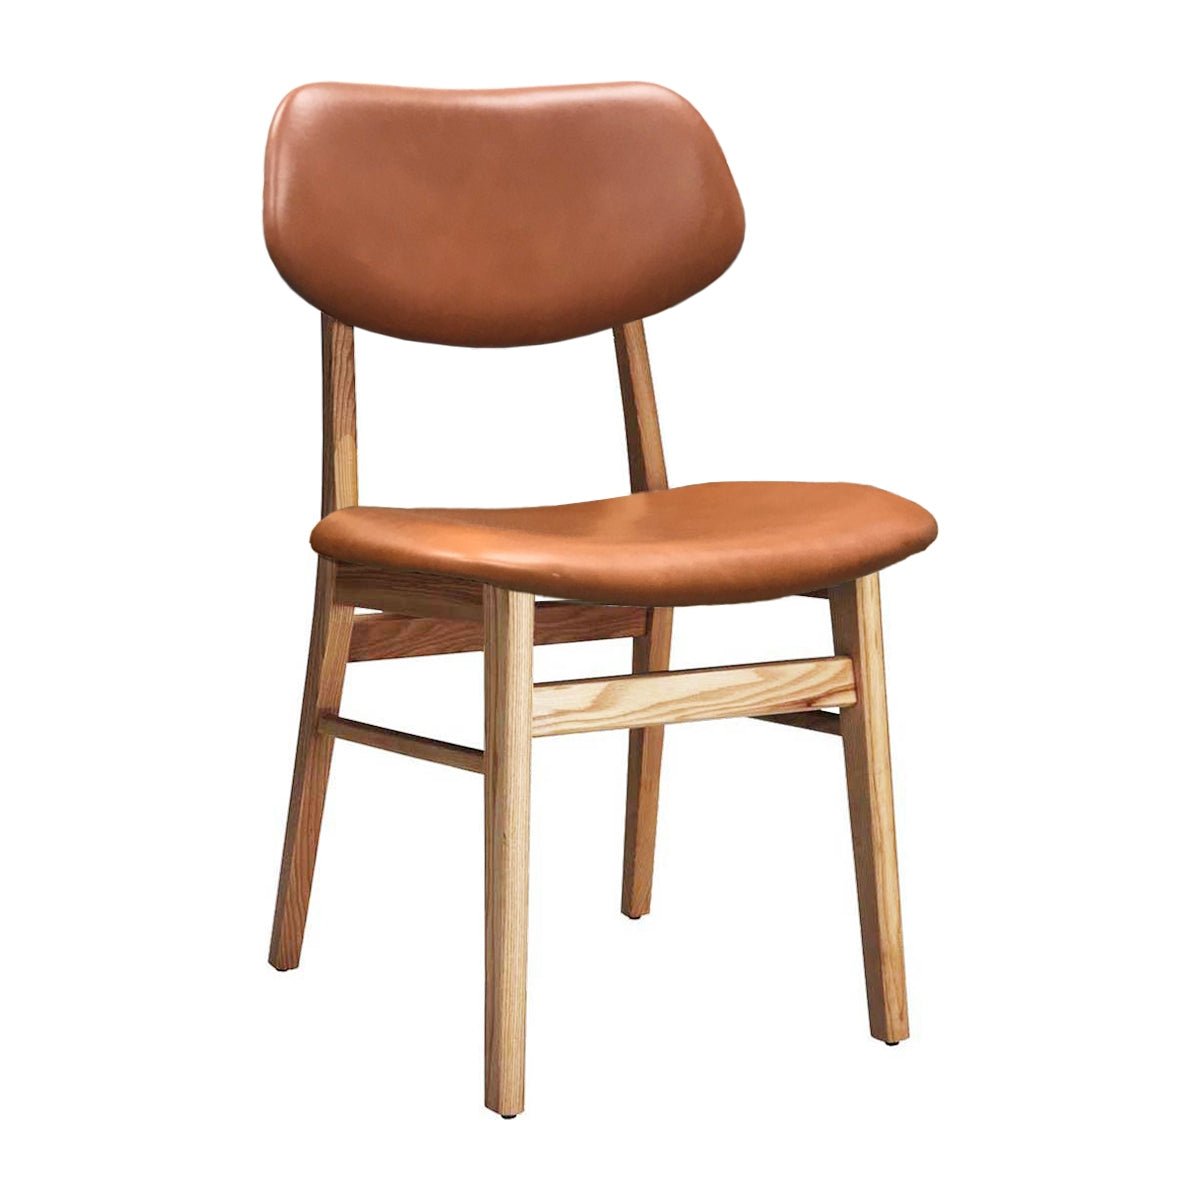 Ari Leather Dining Chair (Ash)